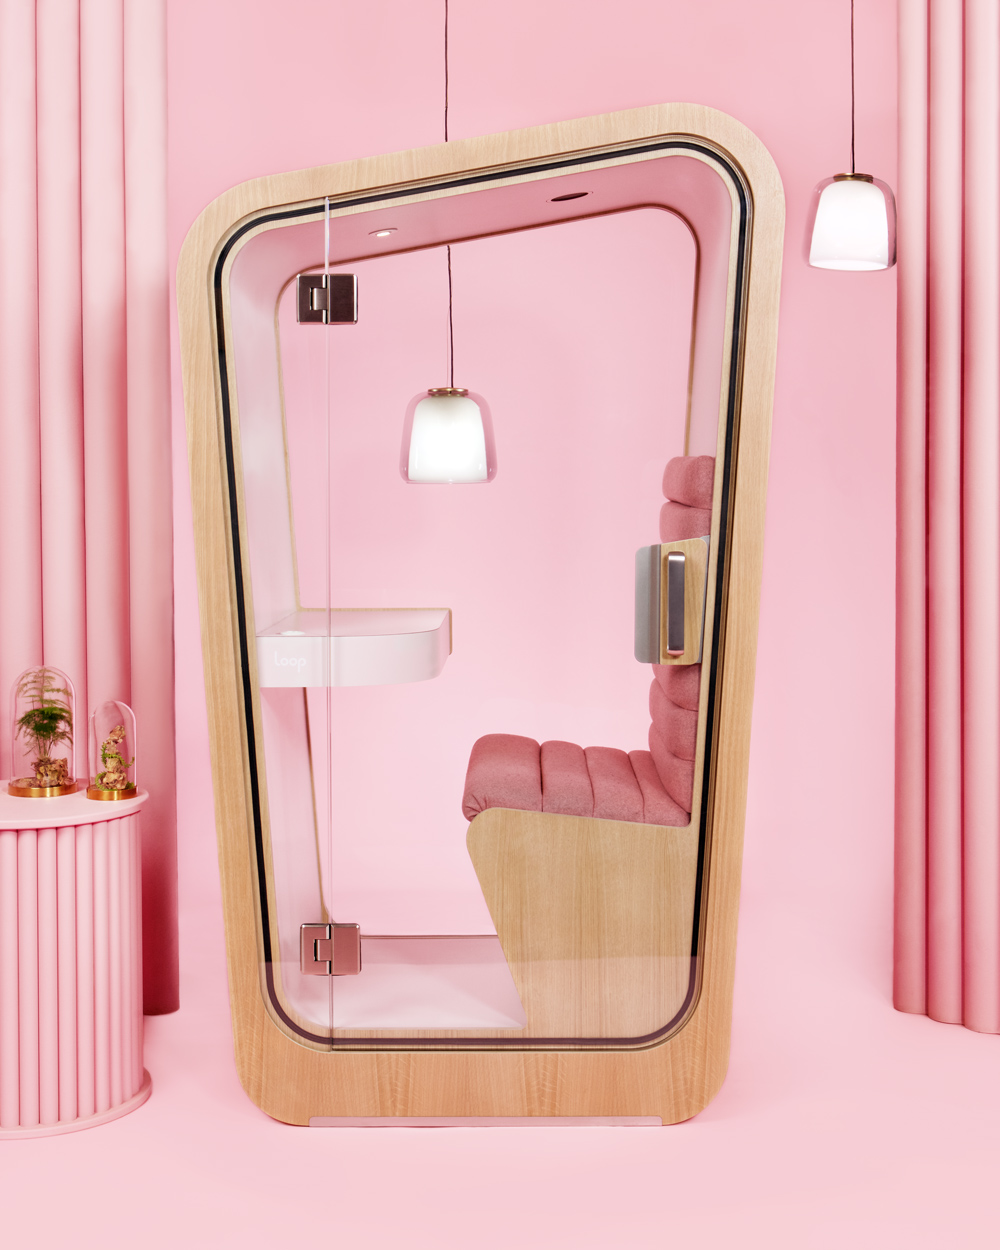 Loop Solo - phone booth work pod in modern and stylish exterior and interior design with comfortable and luxurious light pink furniture